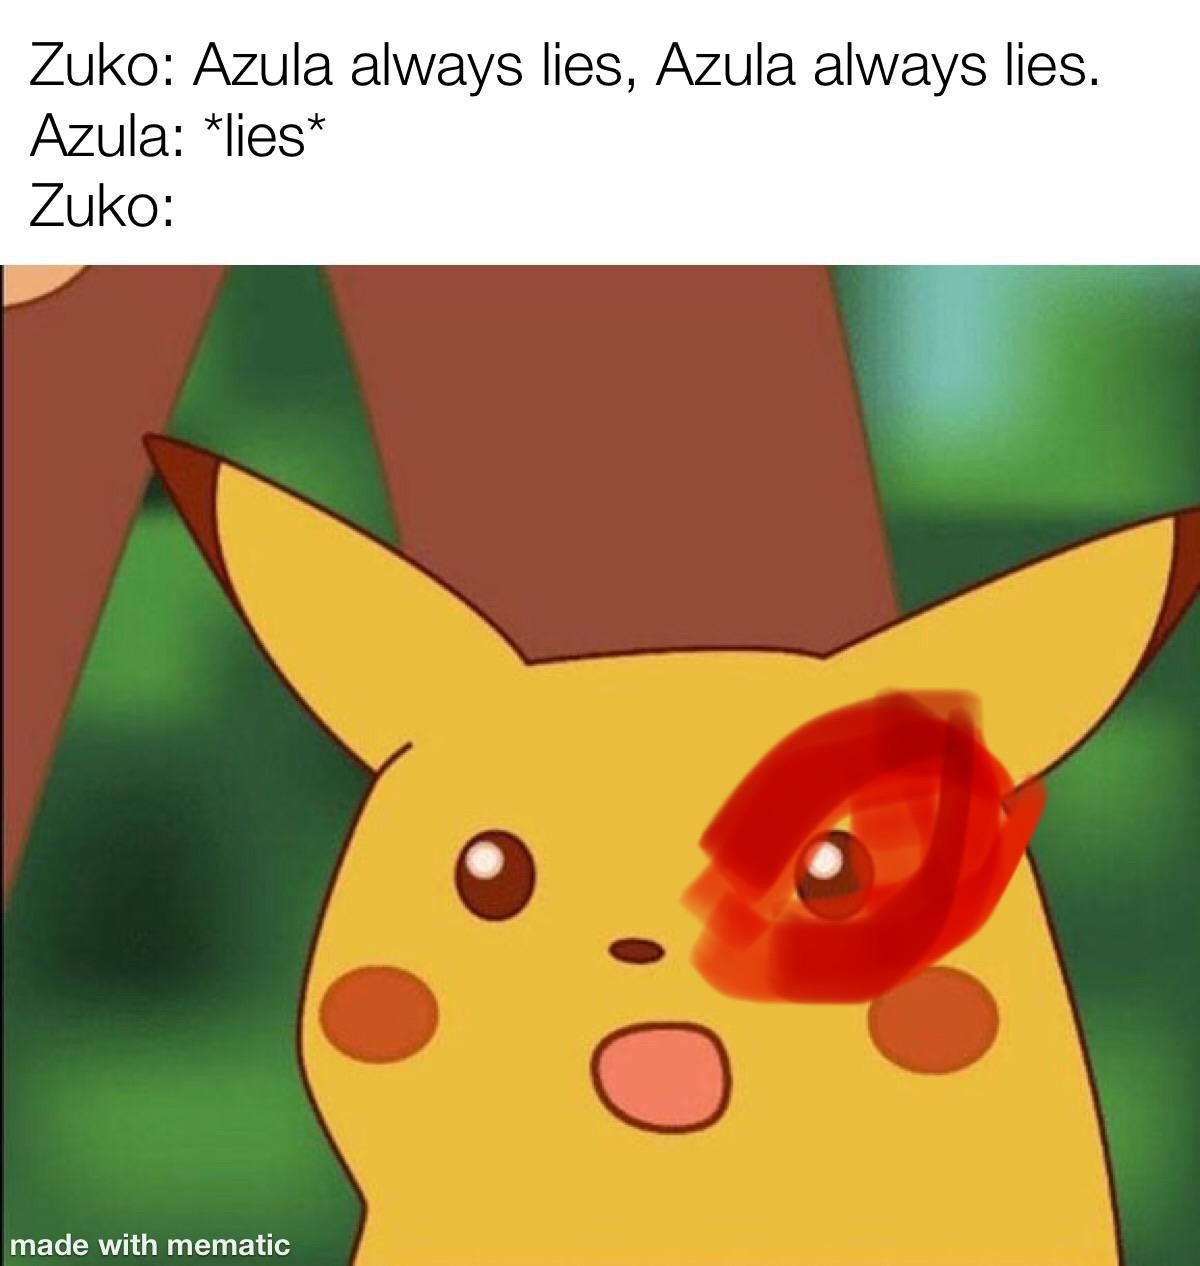 used lazy Seal. .. Zuko when Azula lies to save his ass